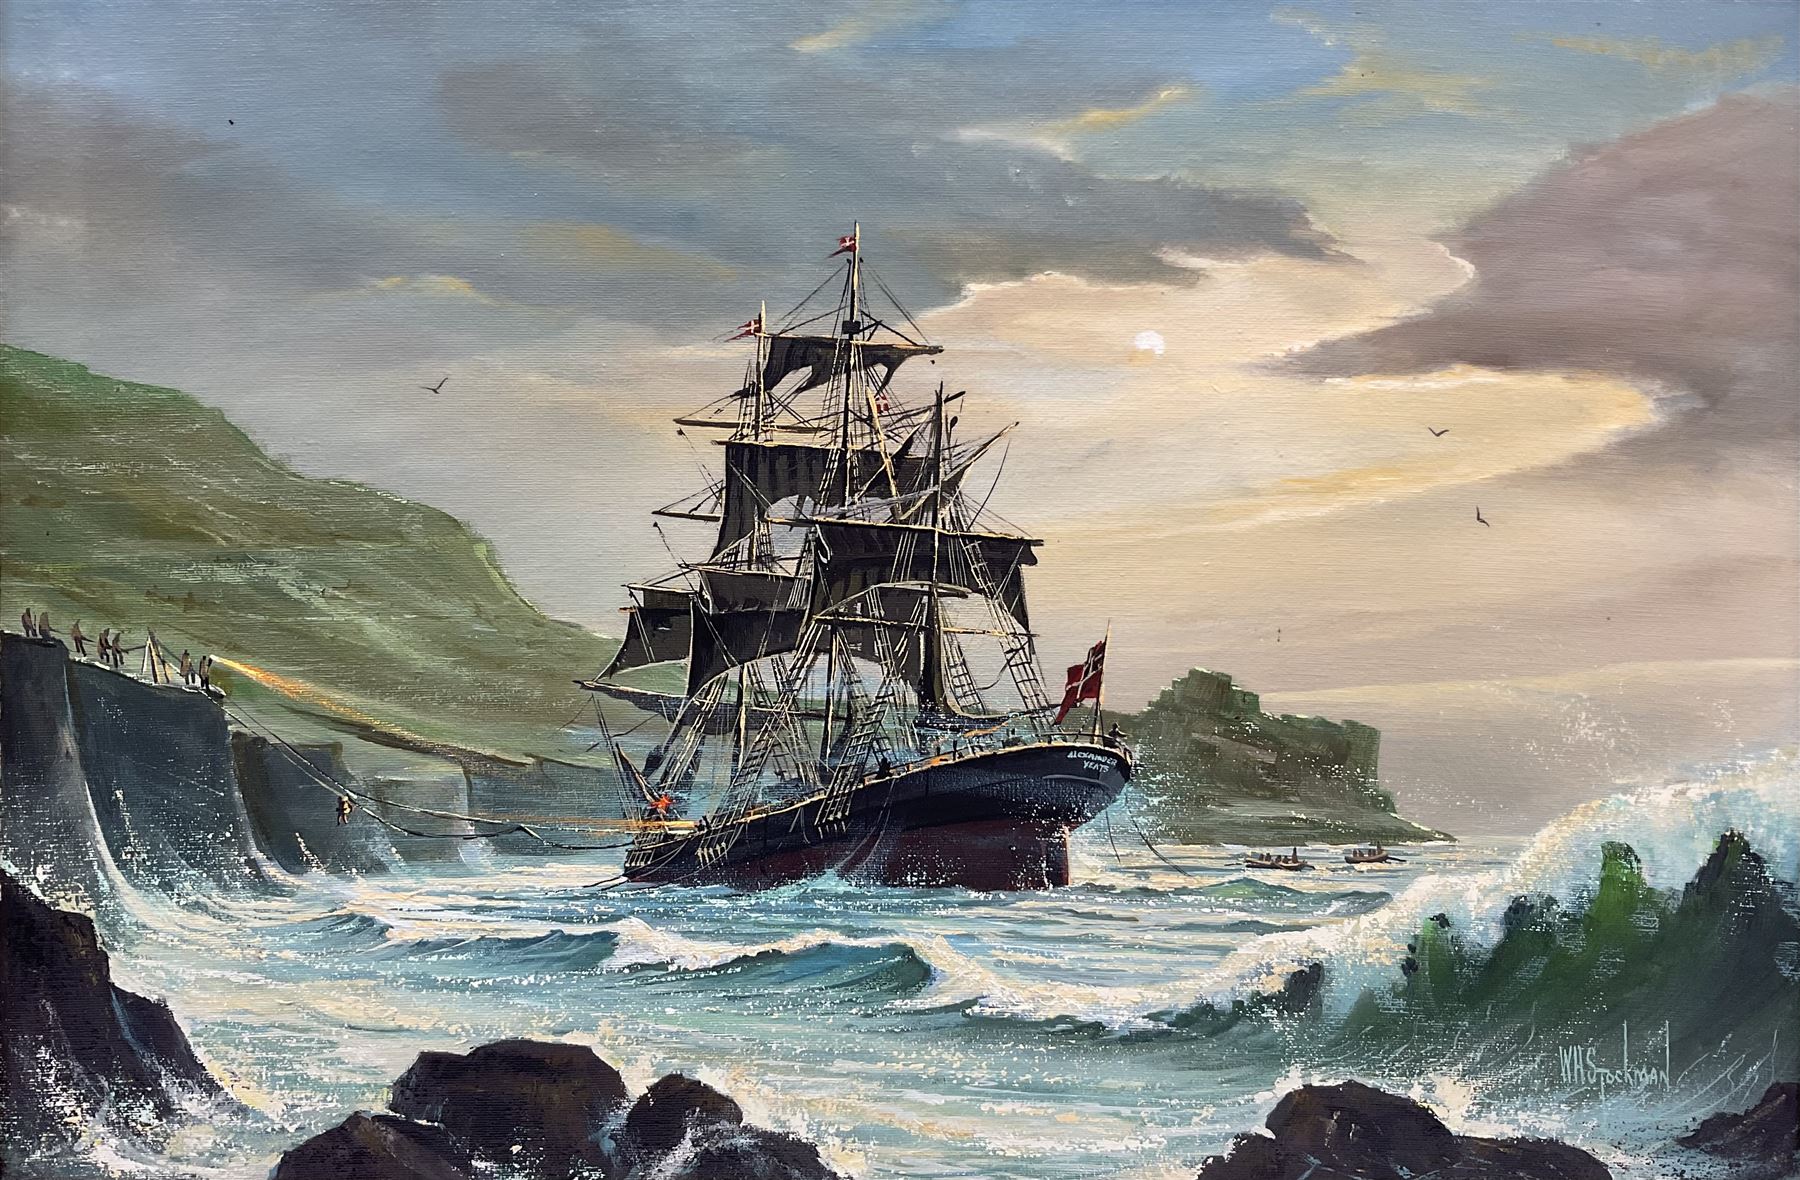 W H Stockman (20th century): Fully Rigged Ship 'Alexander Yeats' in a Cove